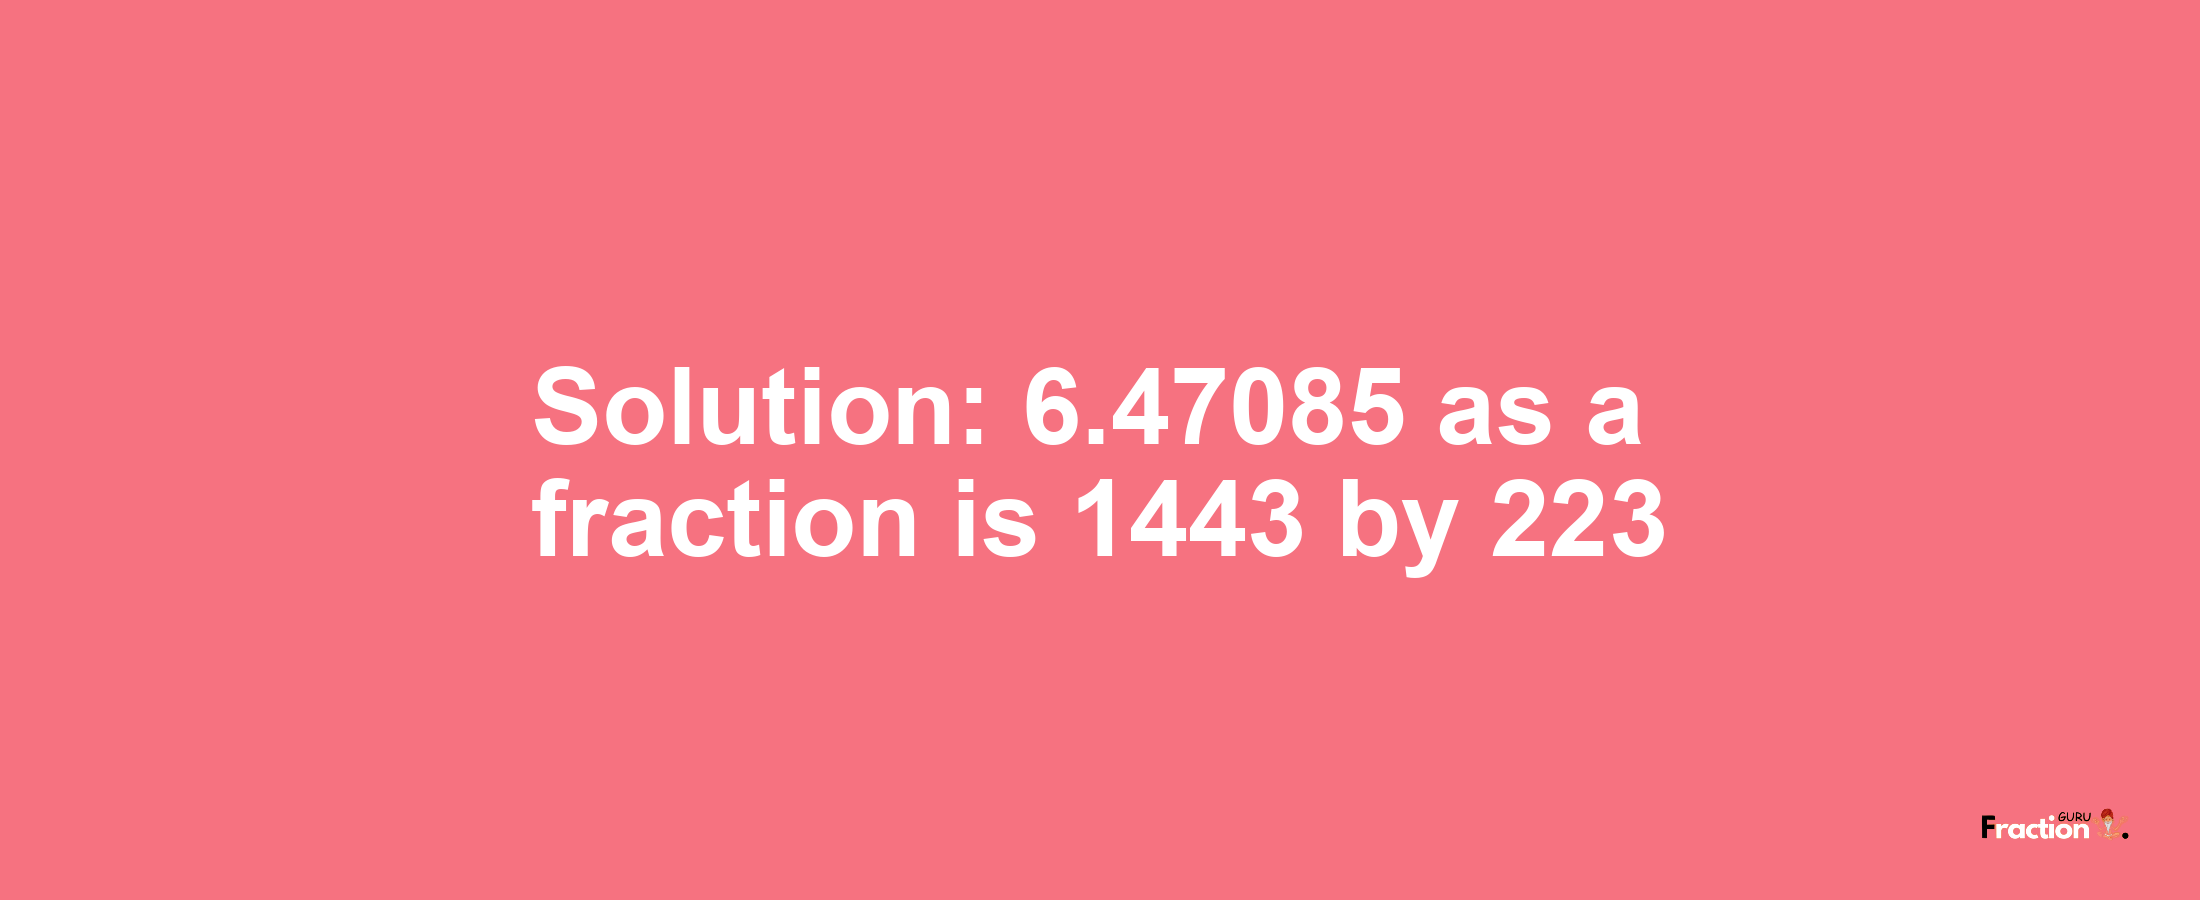 Solution:6.47085 as a fraction is 1443/223